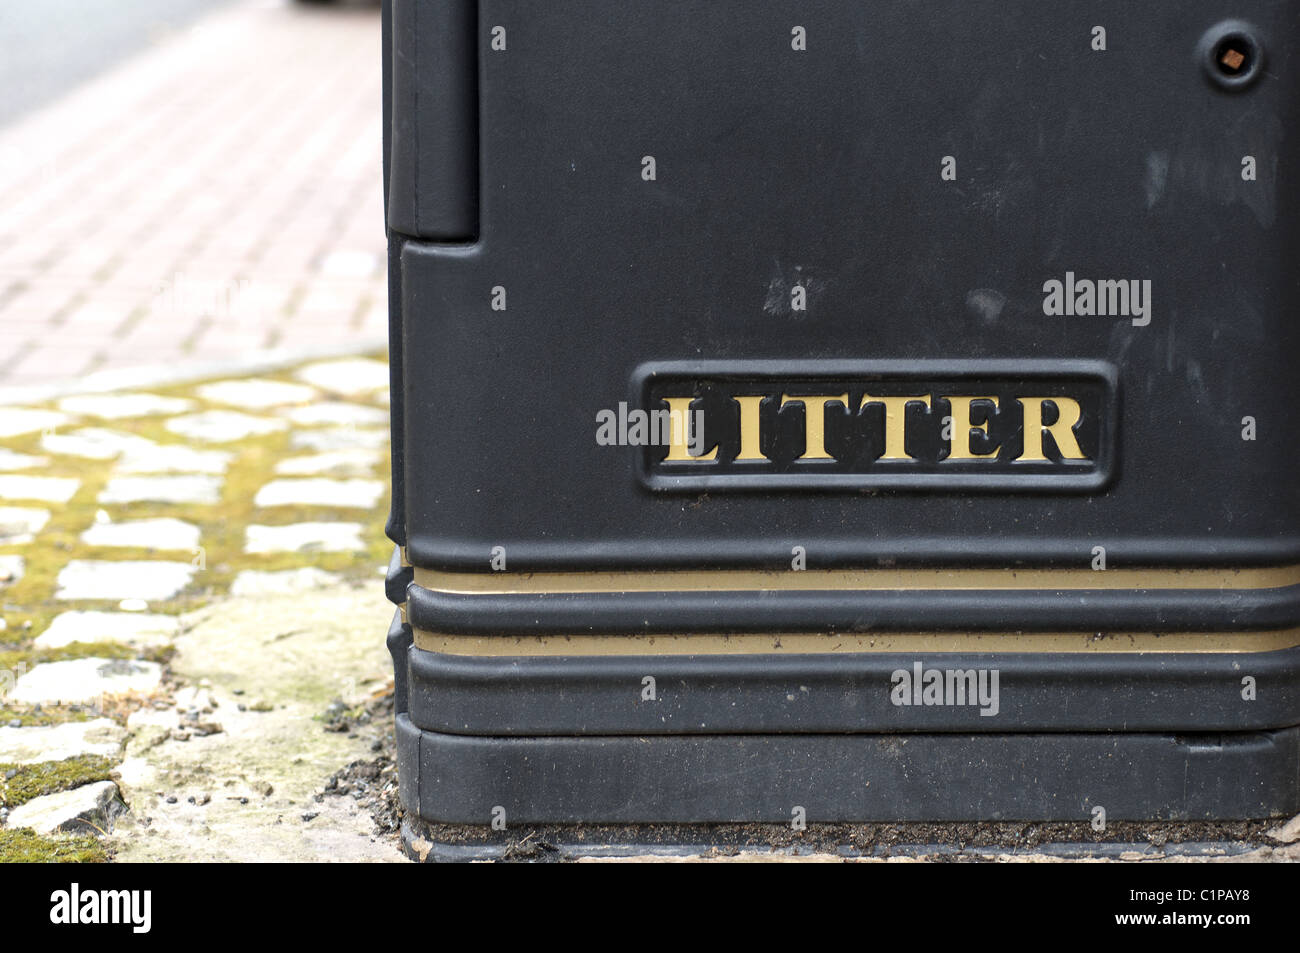 Signs from the British high street. Litter bin close up Stock Photo